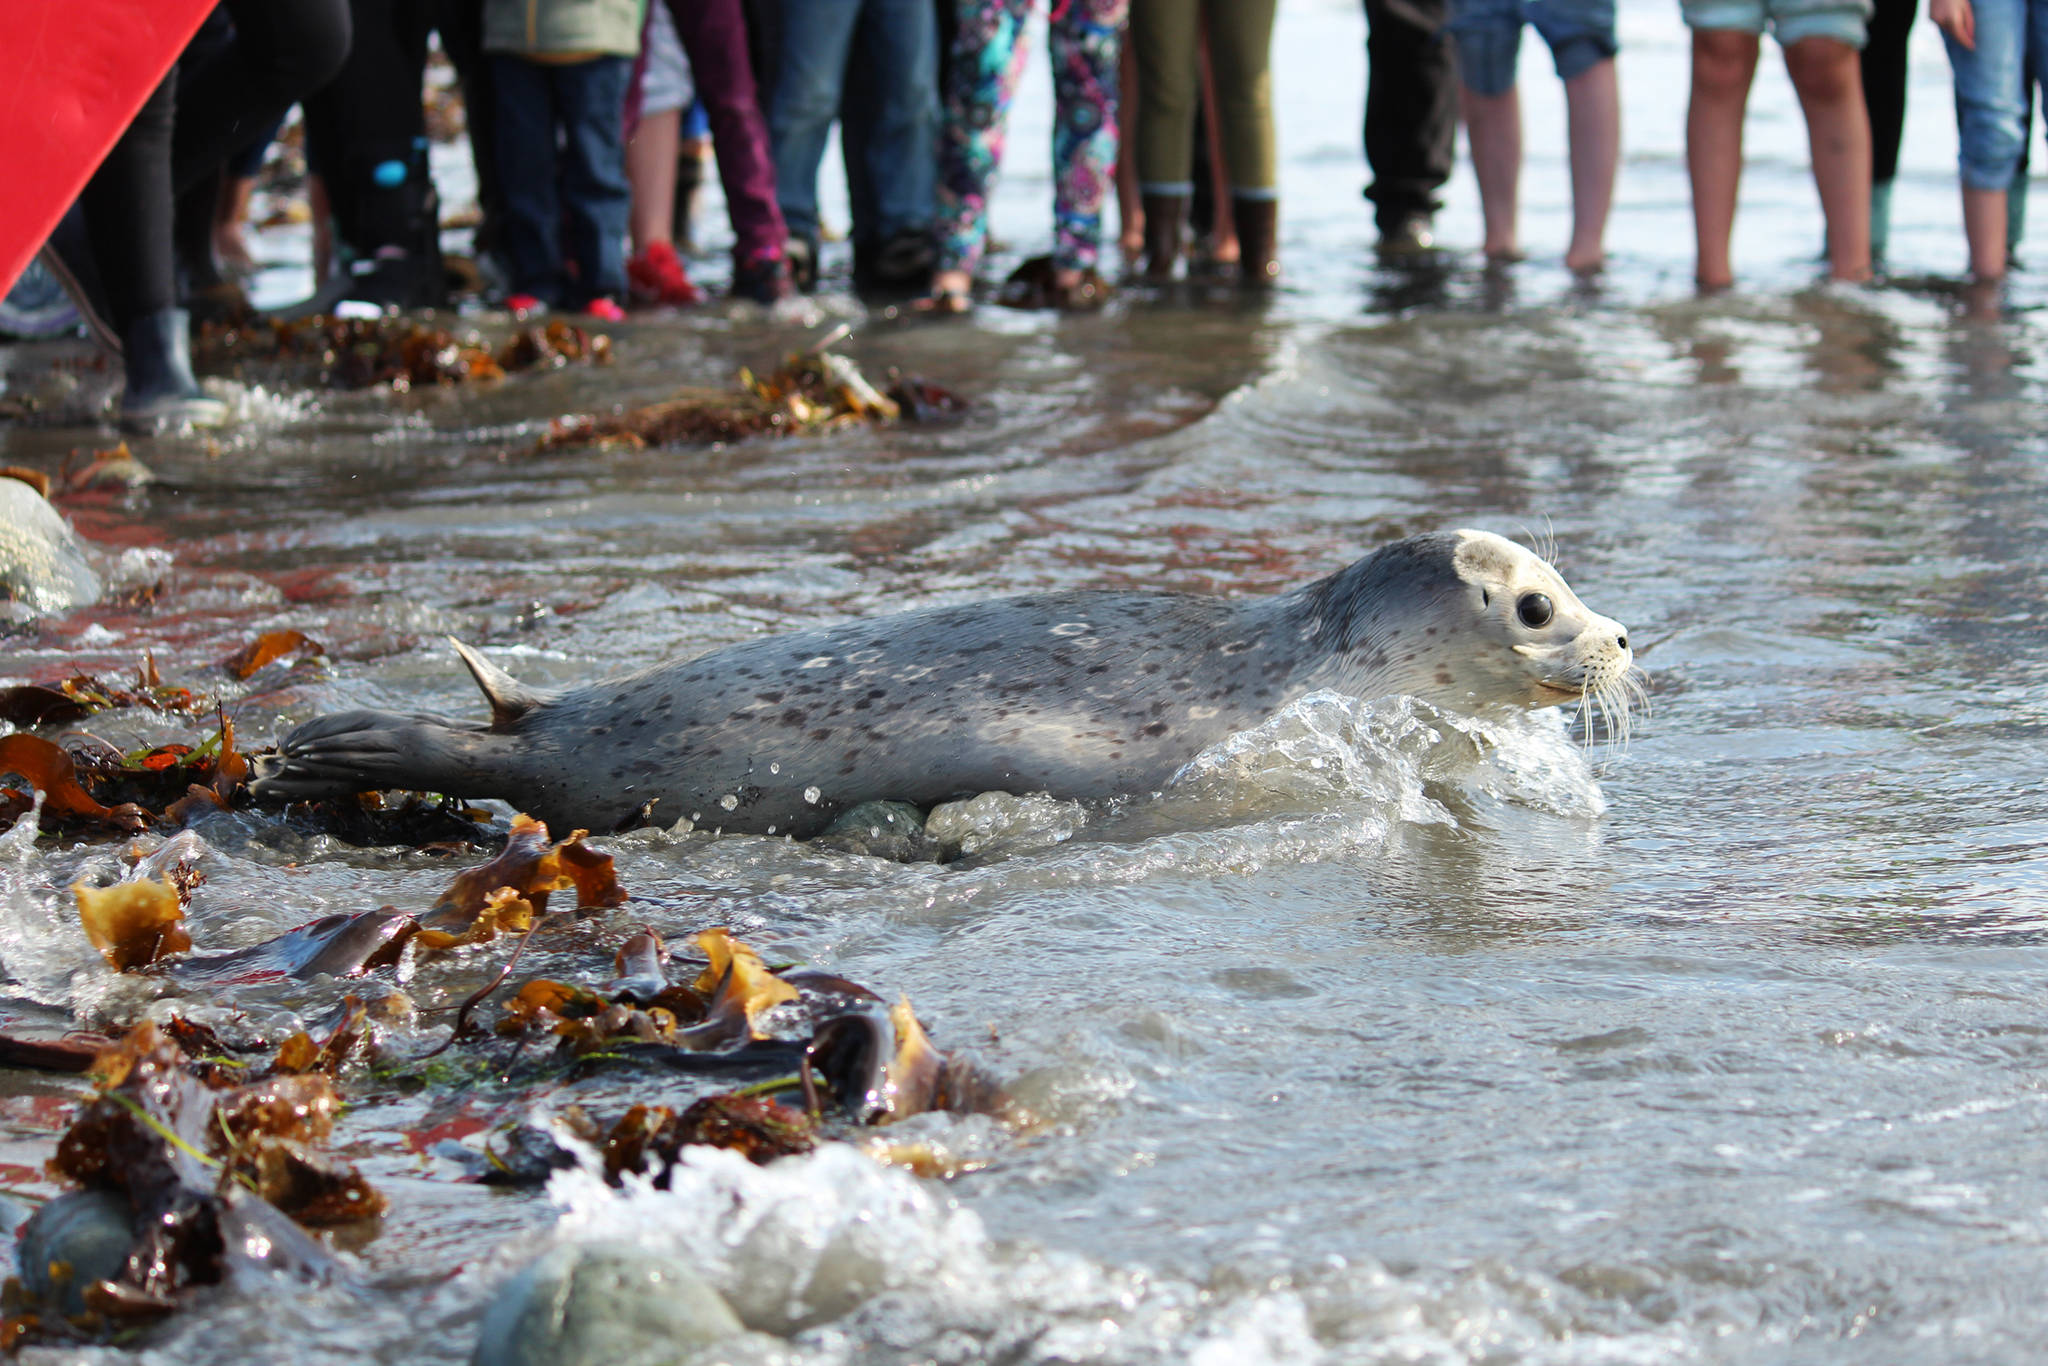 Megan Pacer/Homer News                                A harbor seal swims into the waters of Kachemak Bay after being released back into the wild by the Alaska SeaLife Center on Thursday at Bishop’s Beach in Homer. The center released two harbor seals Thursday after rehabilitating them through the Wildlife Response Program. The seals were found neglected on Homer area beaches along Kachemak Bay this May.